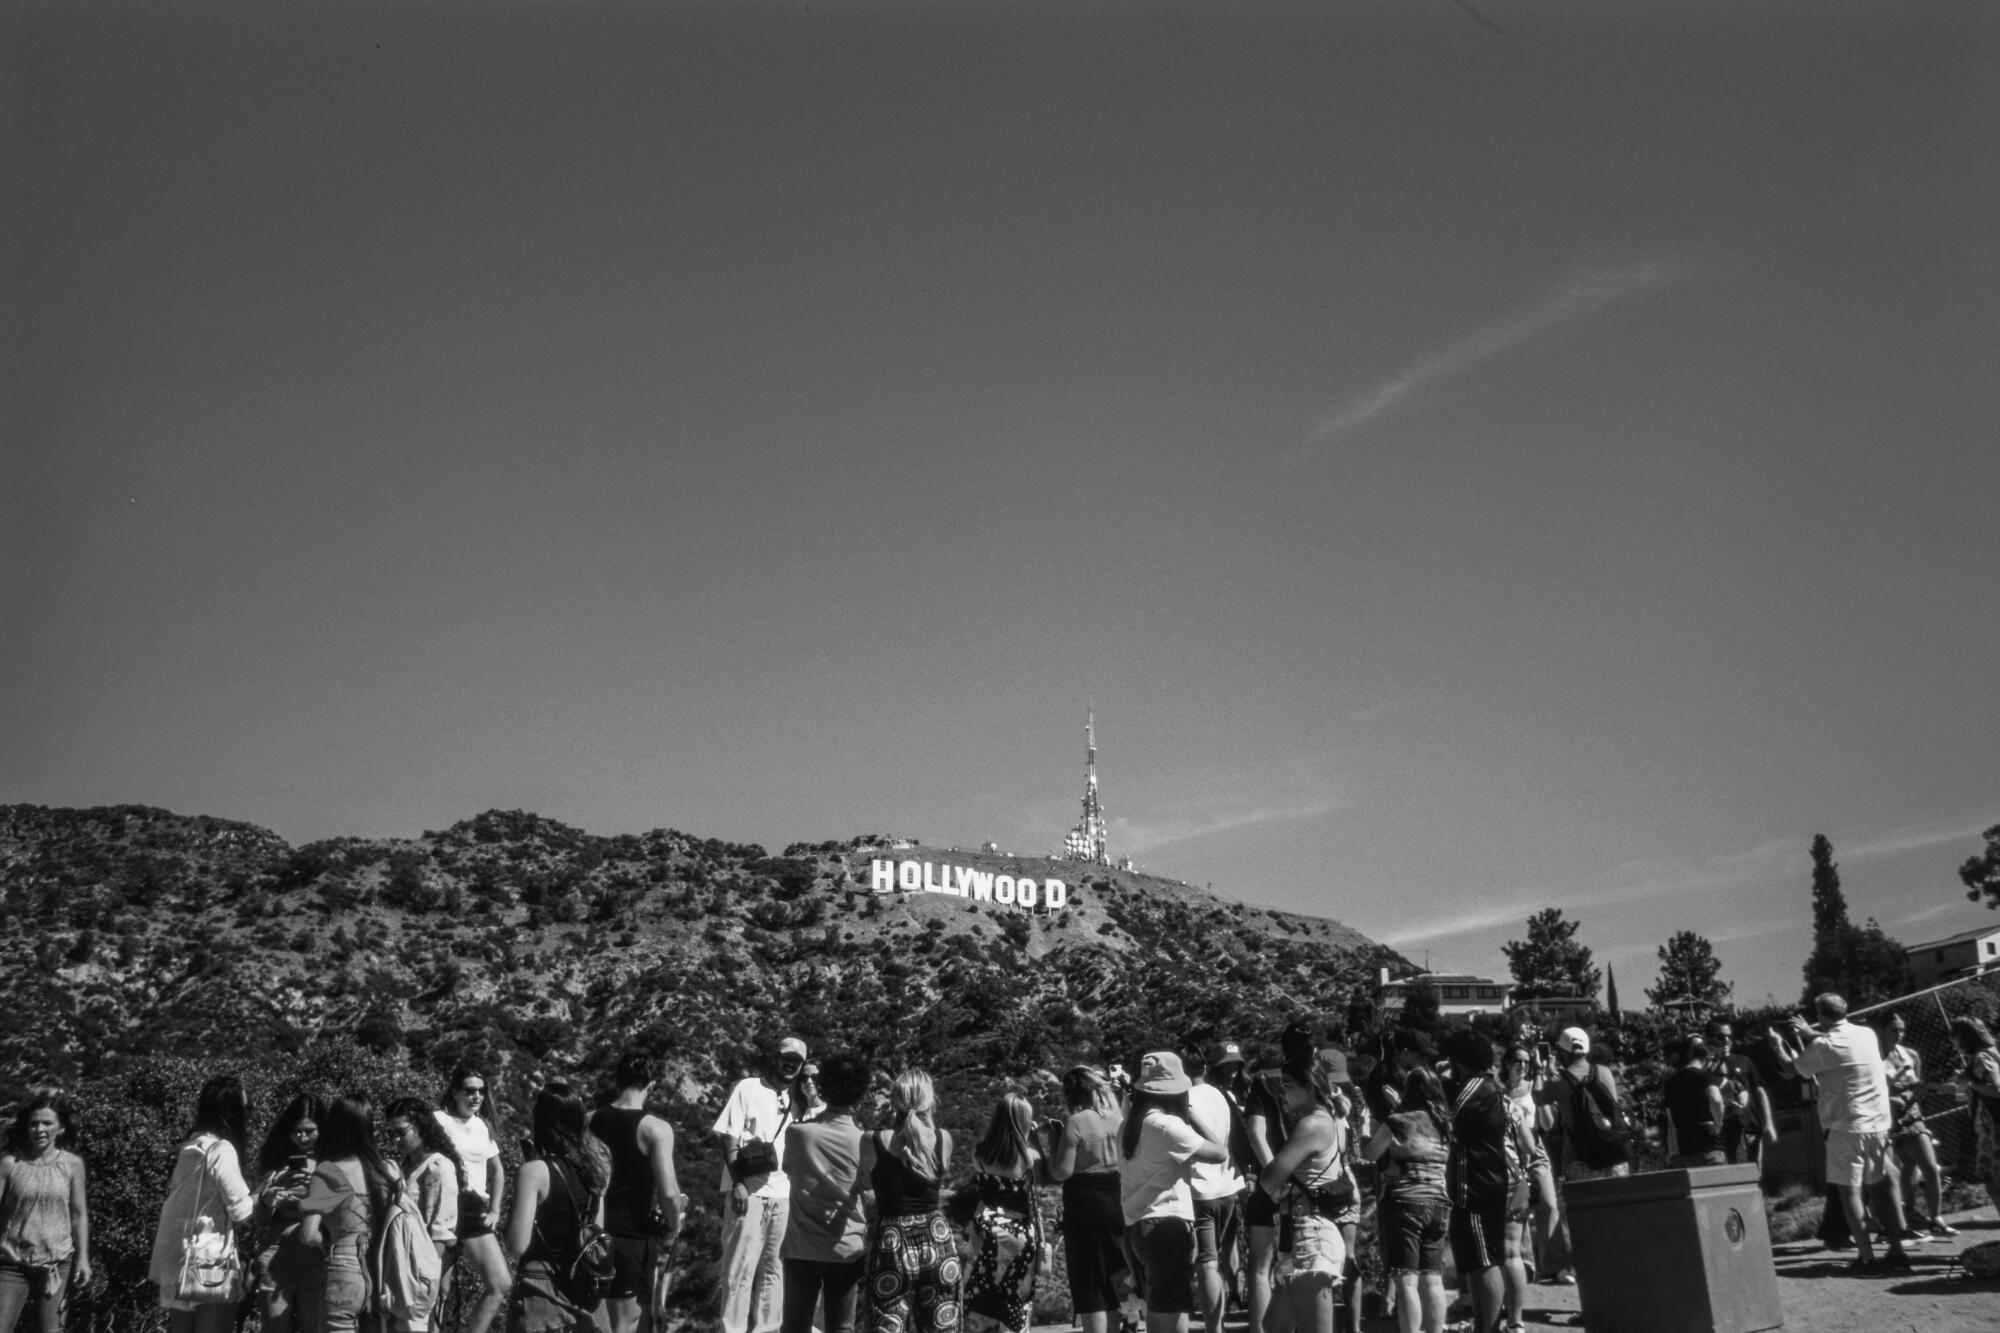 A crowd of tourists gathers to take photographs of the Hollywood sign.